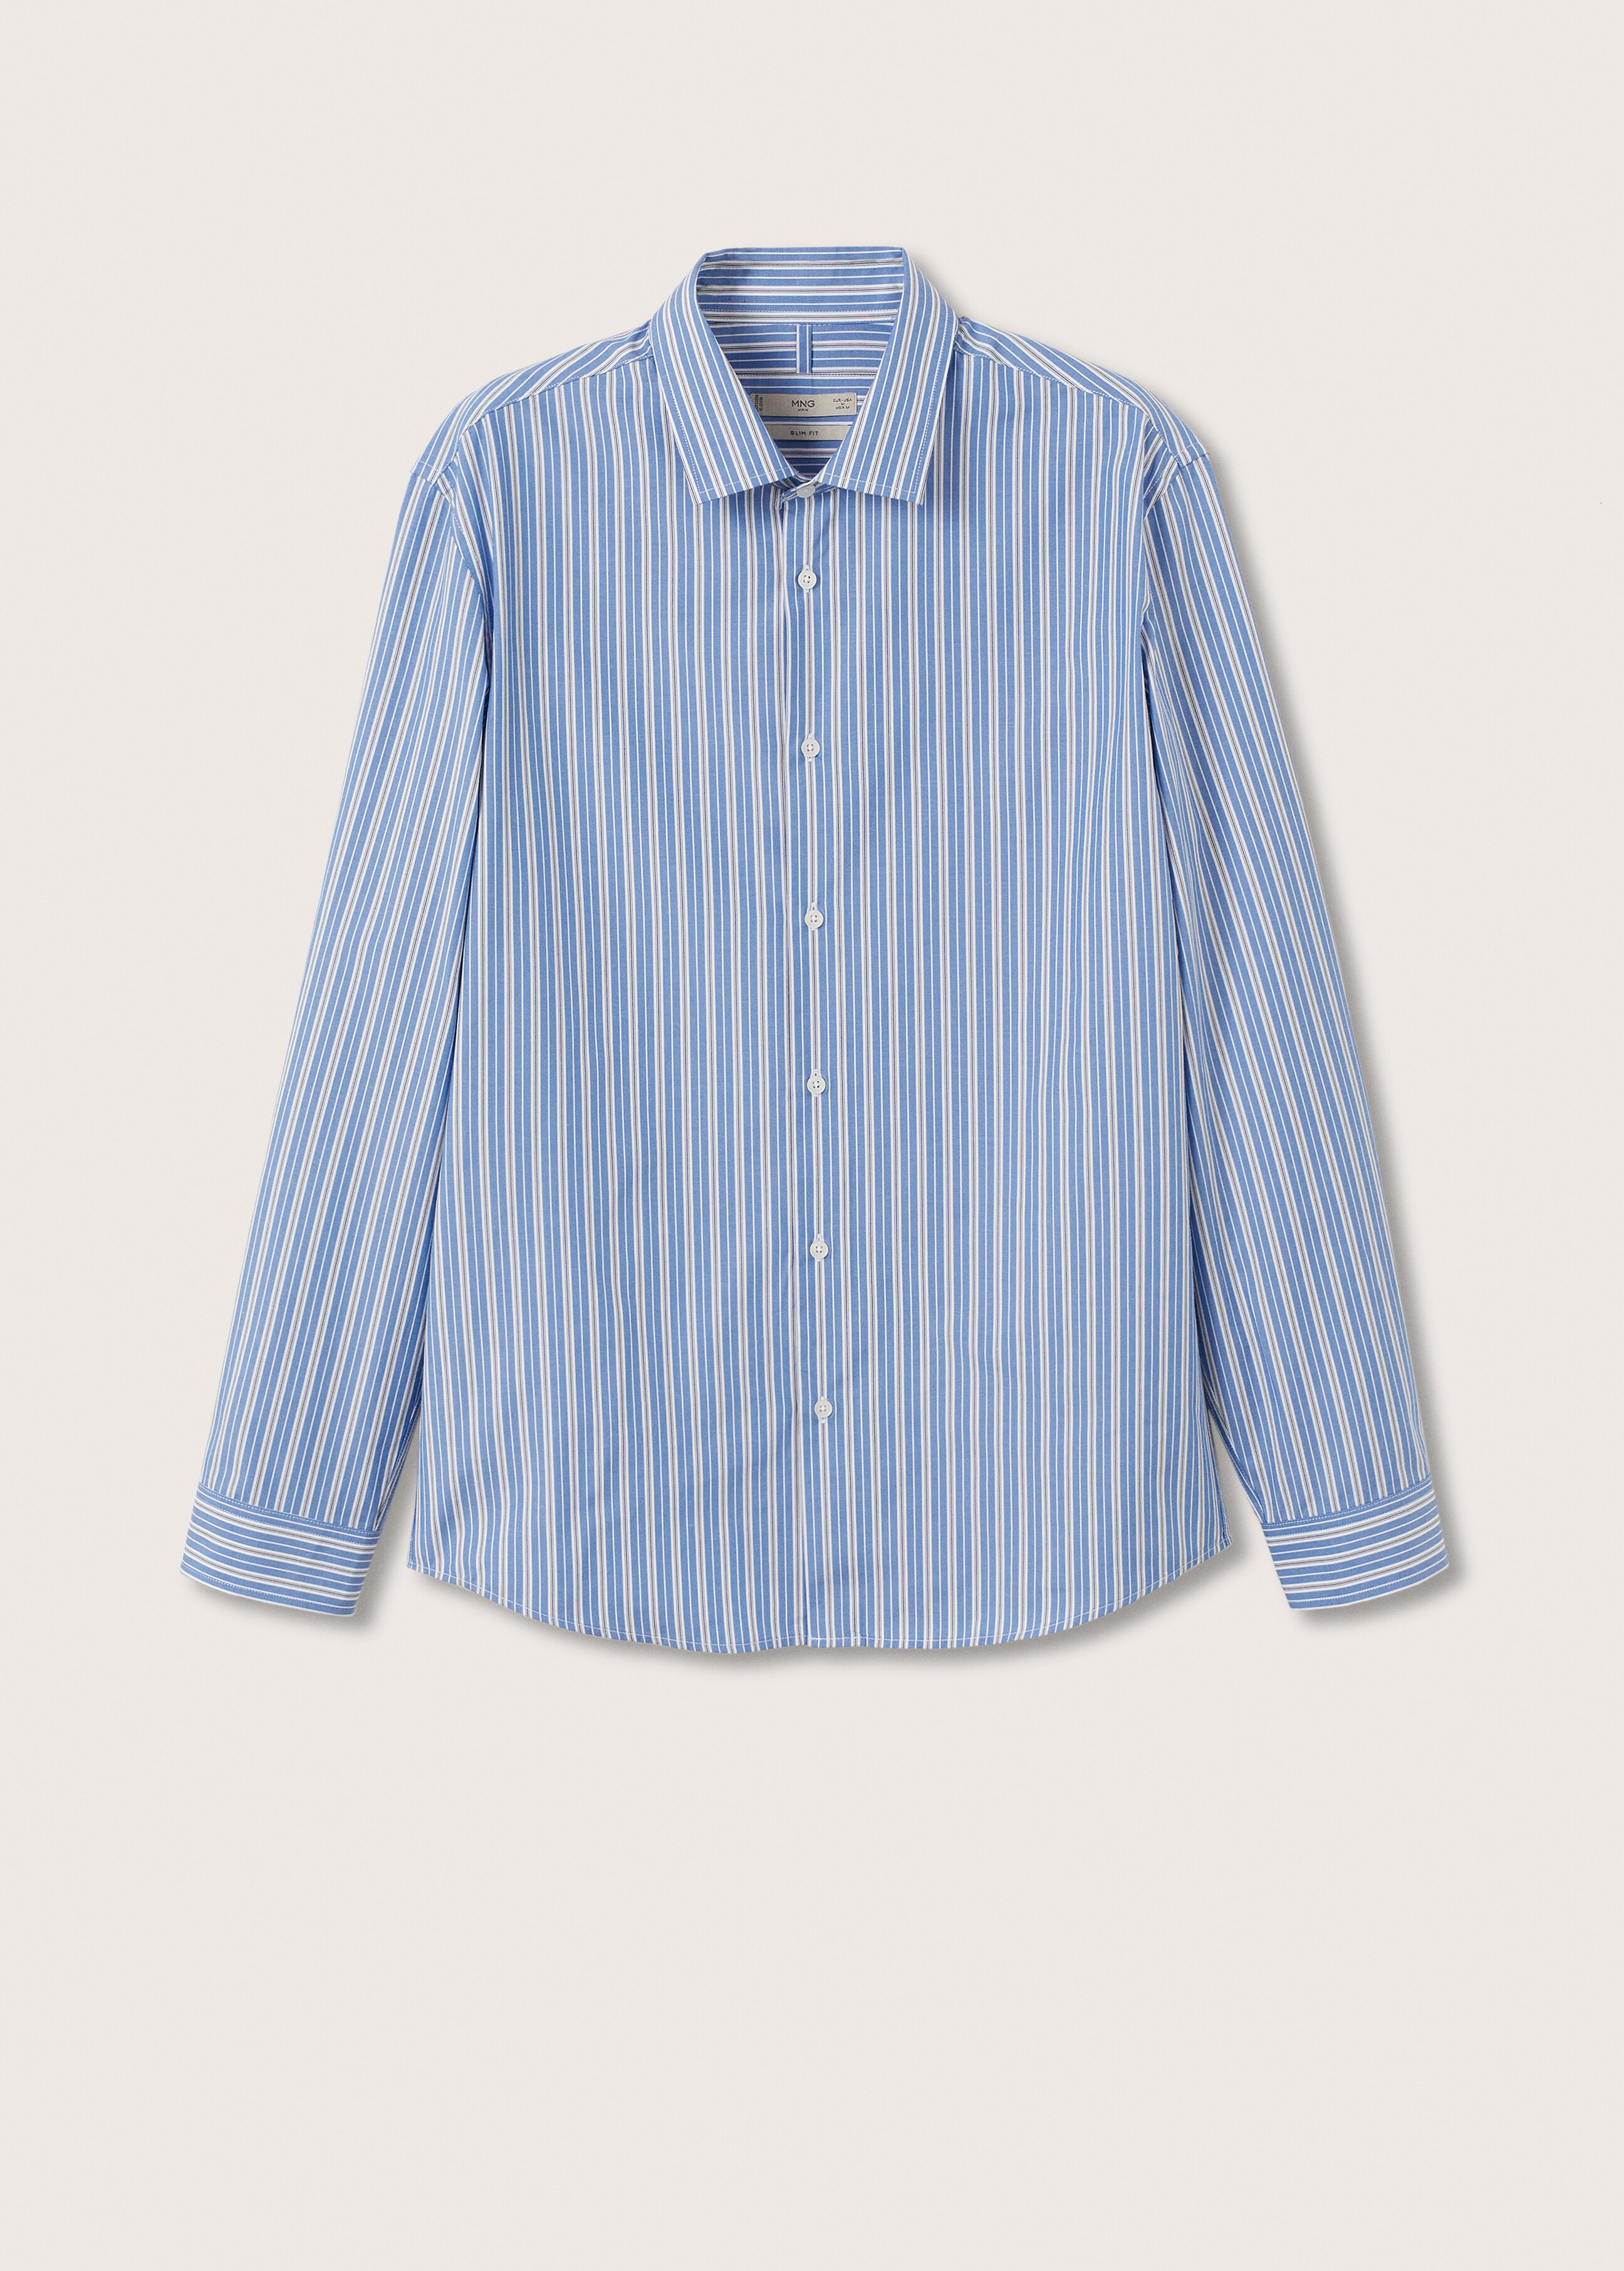 Thermoregulating striped shirt - Article without model